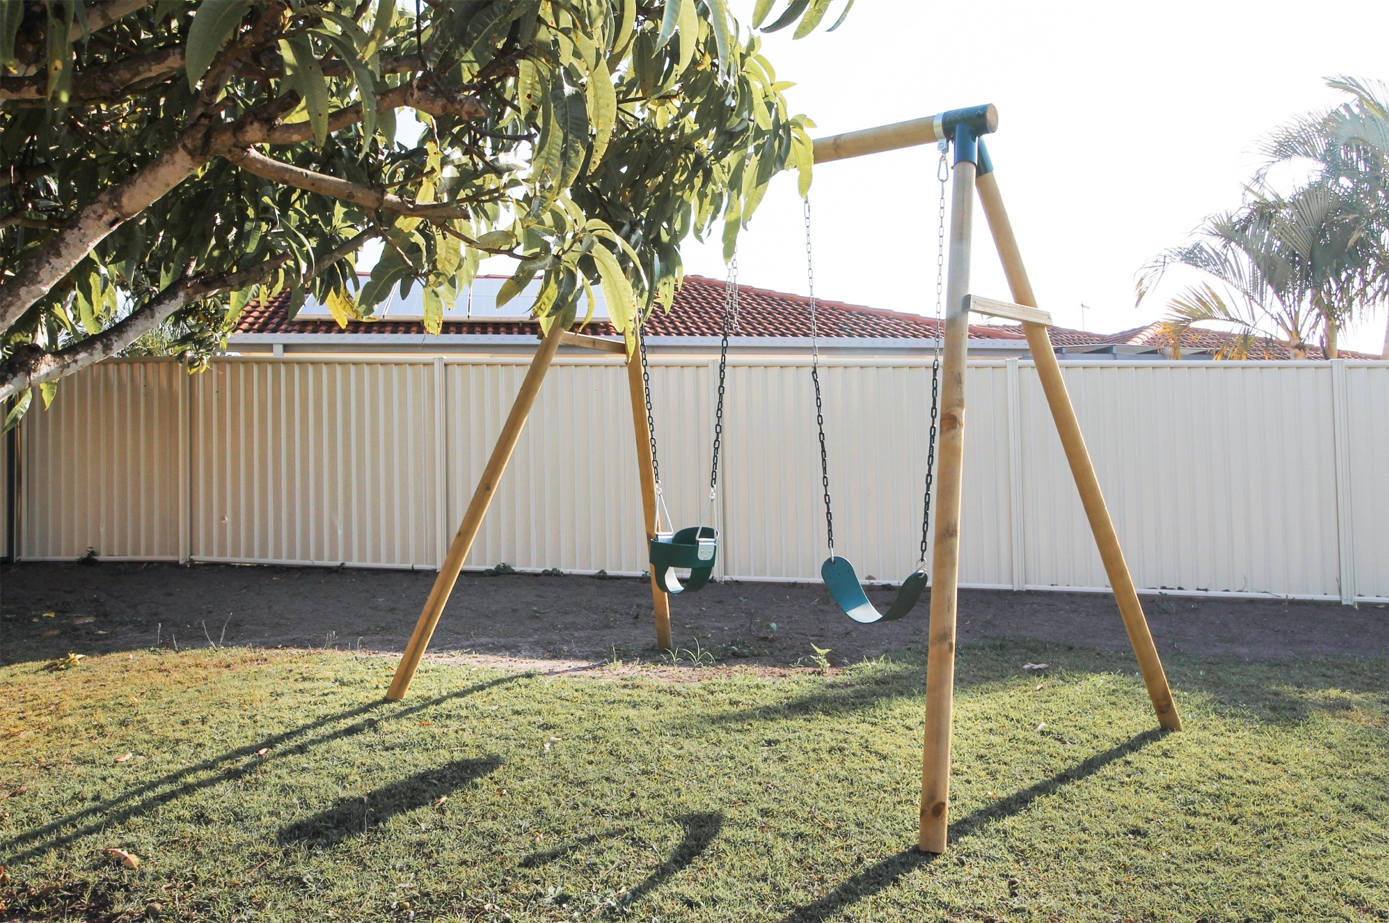 How to Level a Leaning Swing Set